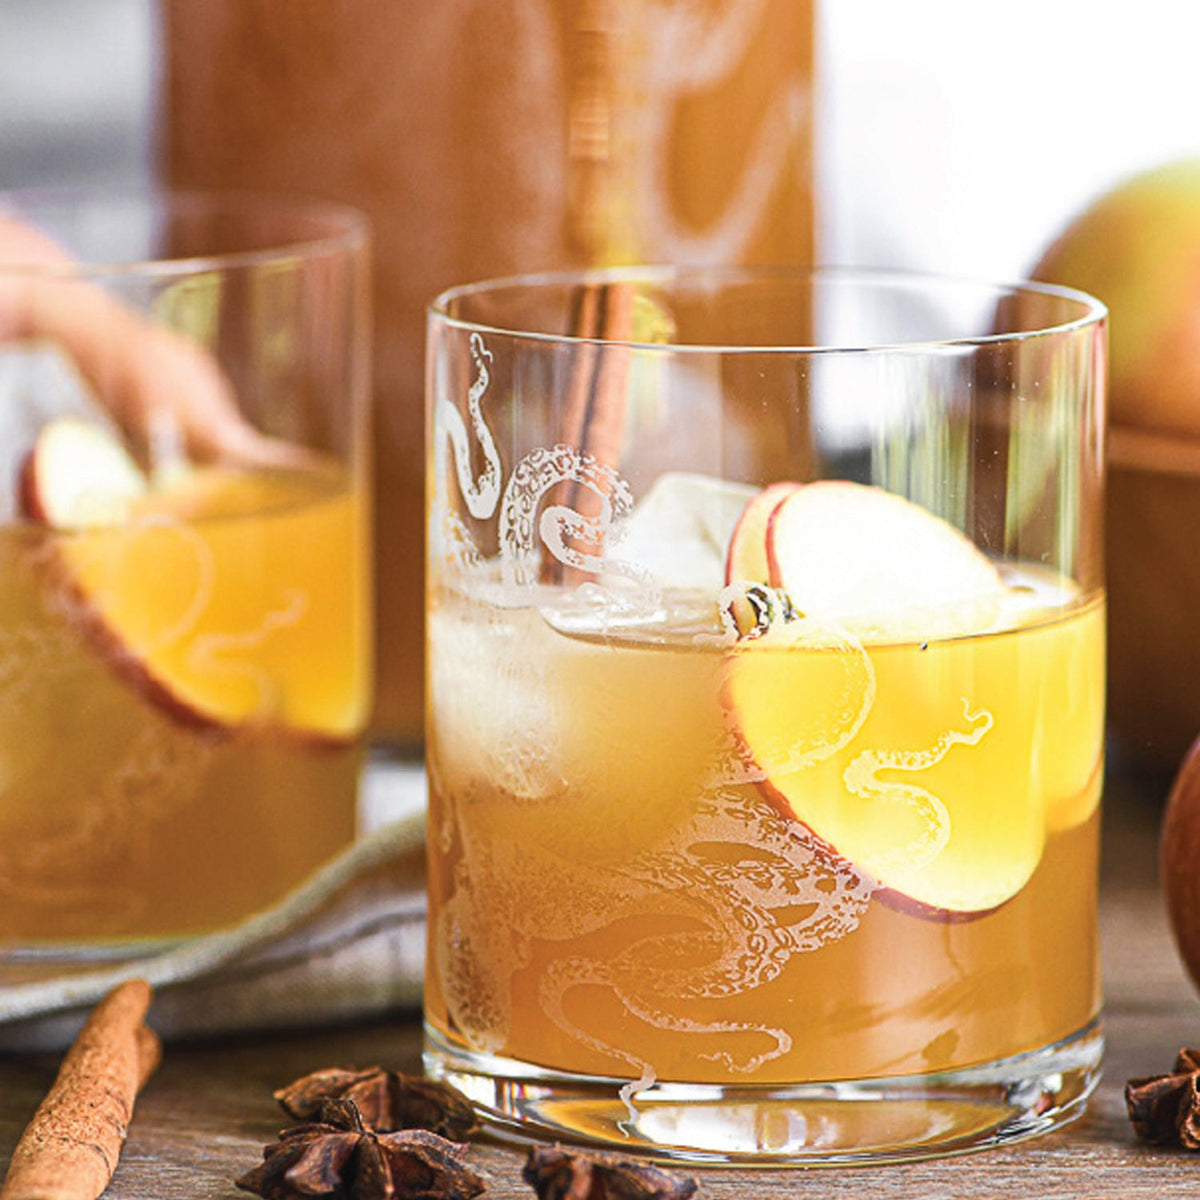 Two glasses of a light brown drink with ice, garnished with apple slices and cinnamon sticks. The Lucy Rocks Glasses by Caskata Artisanal Home boast an intricate design. Star anise and a whole apple are in the background, adding to the autumnal charm.